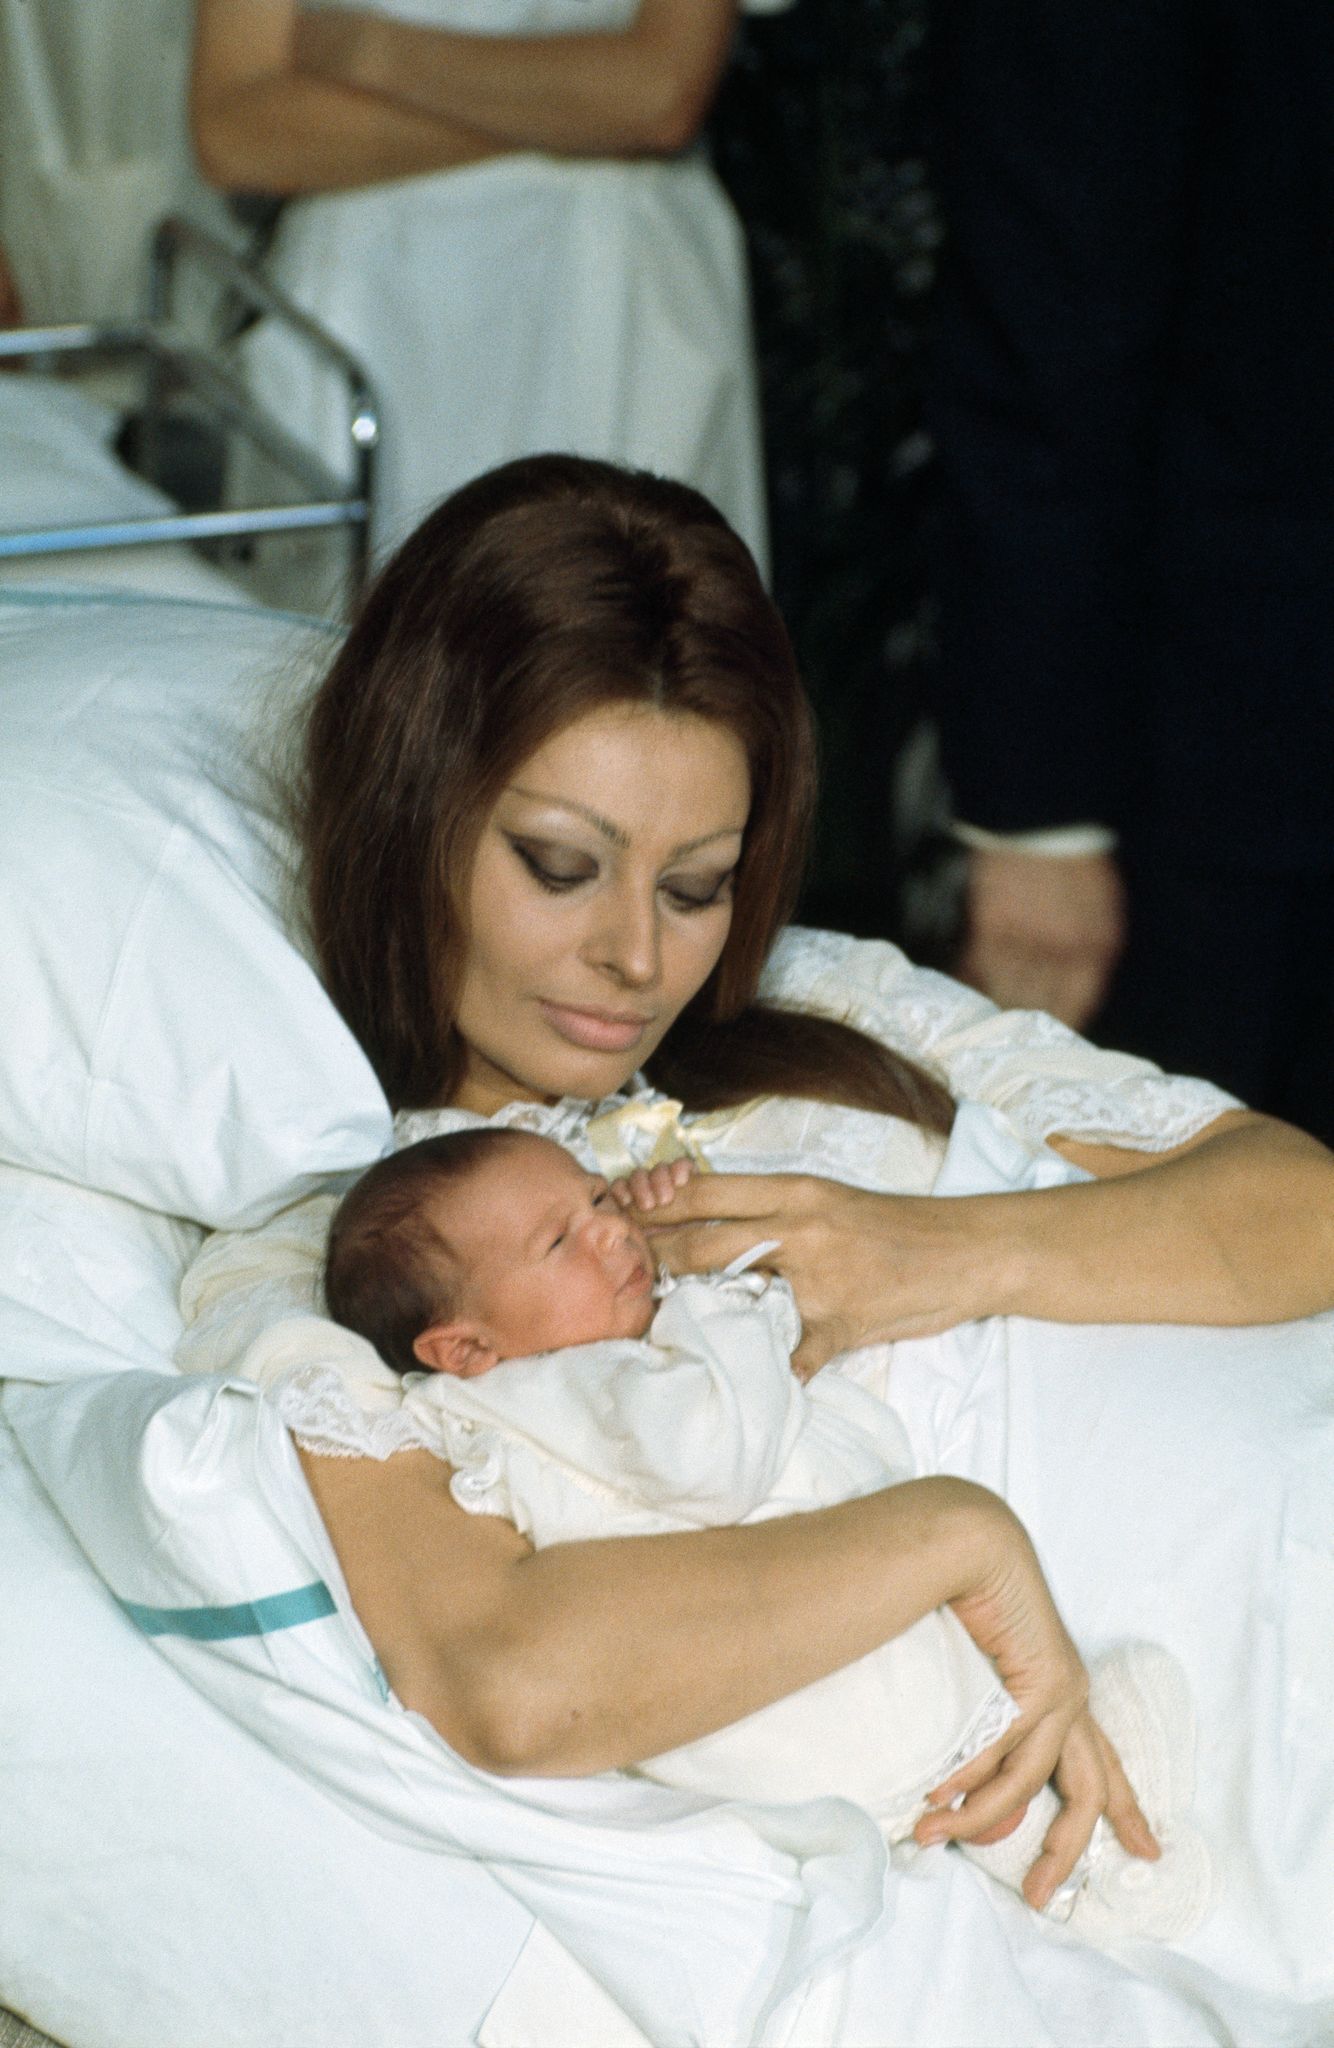 Sophia Loren gives birth to her first child, Carlo Ponti, Jr. | Source: Getty Images